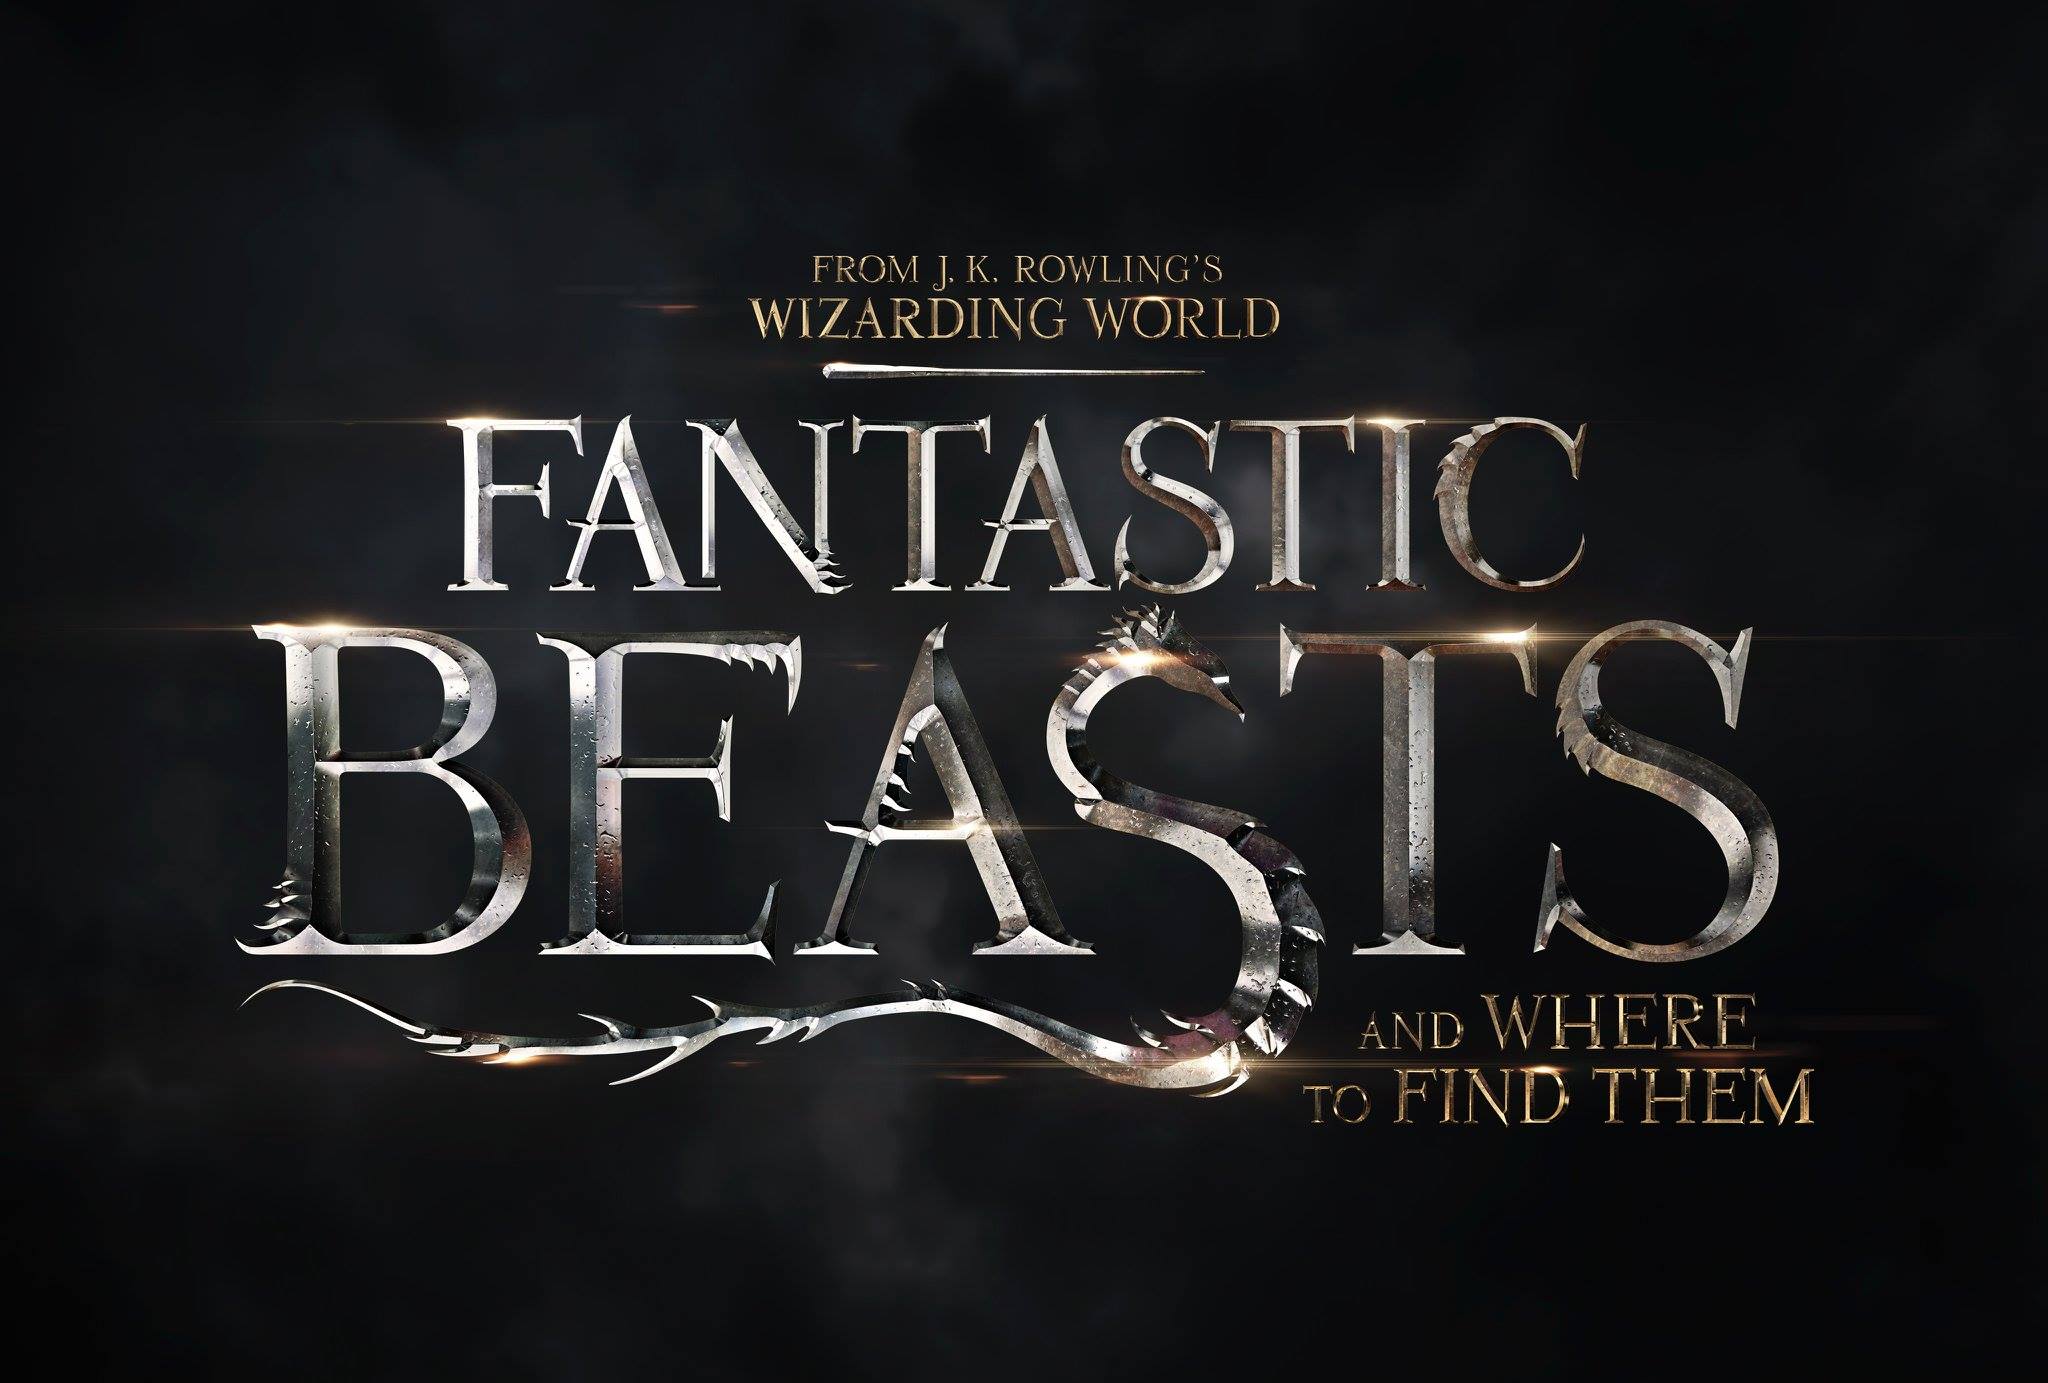 Fantastic Beasts and Where to Find Them - Warner Bros.